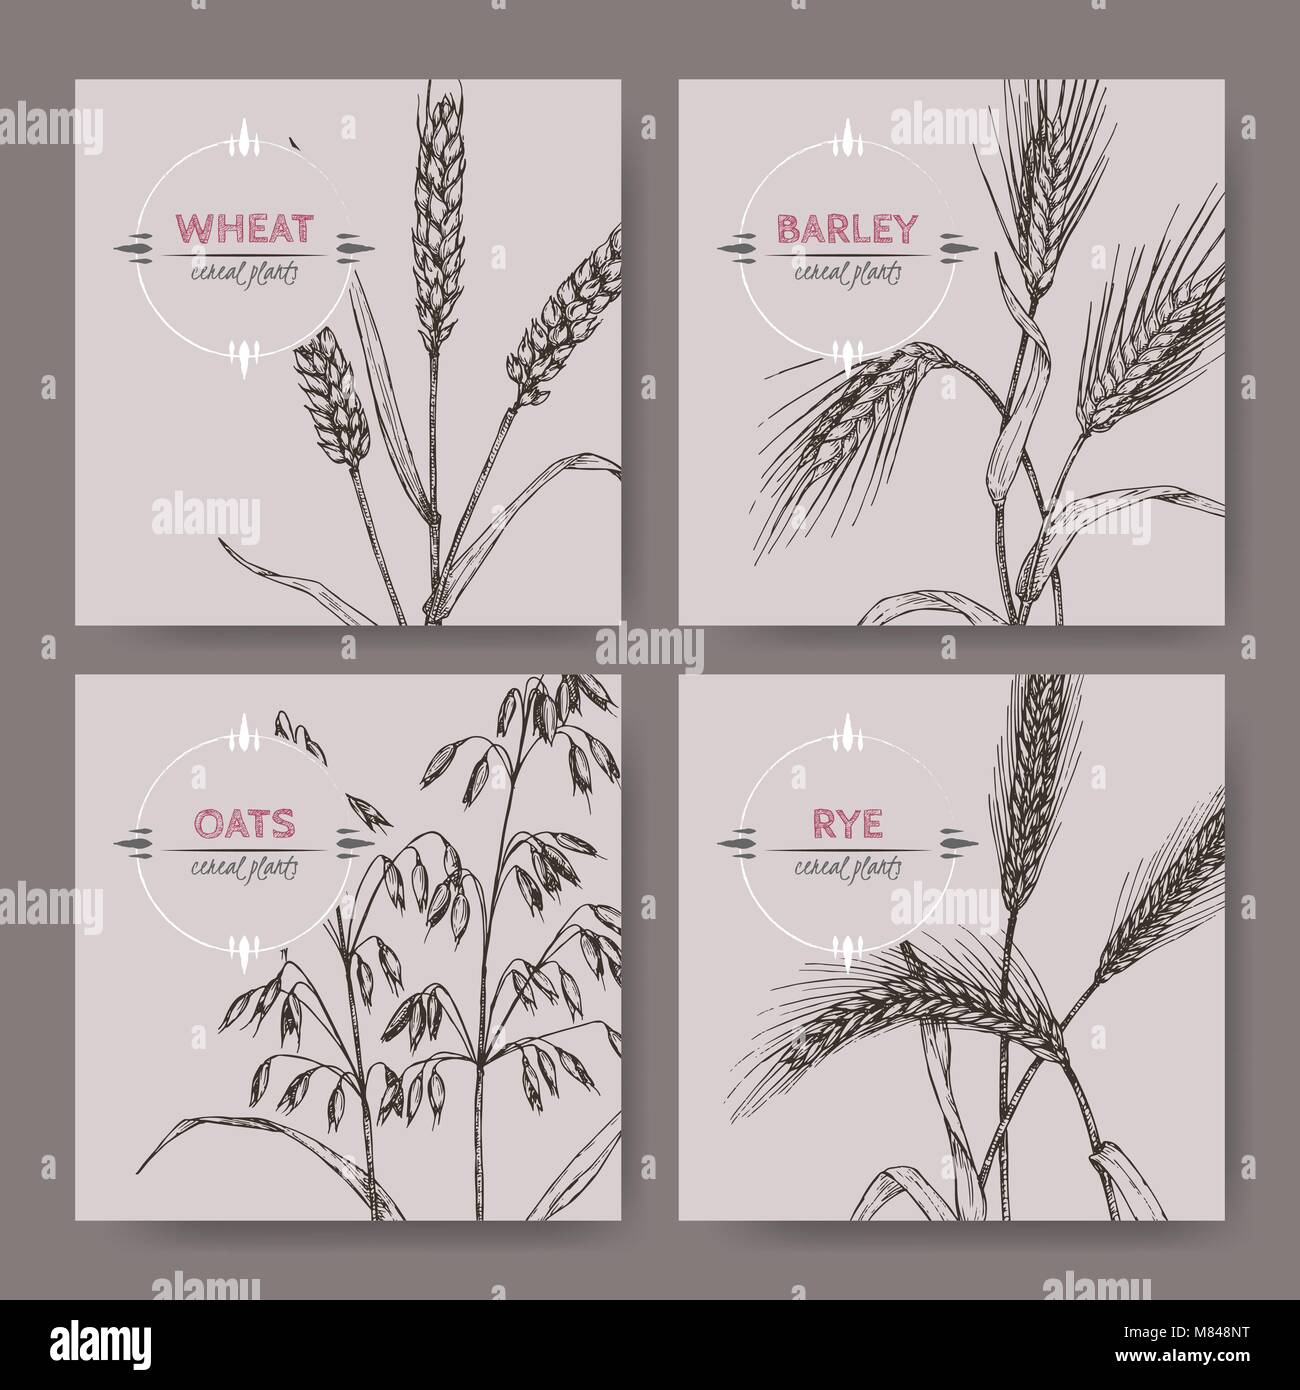 Set of four banenrs with bread wheat, rye, barley and oats sketch. Cereal plants collection. Stock Vector